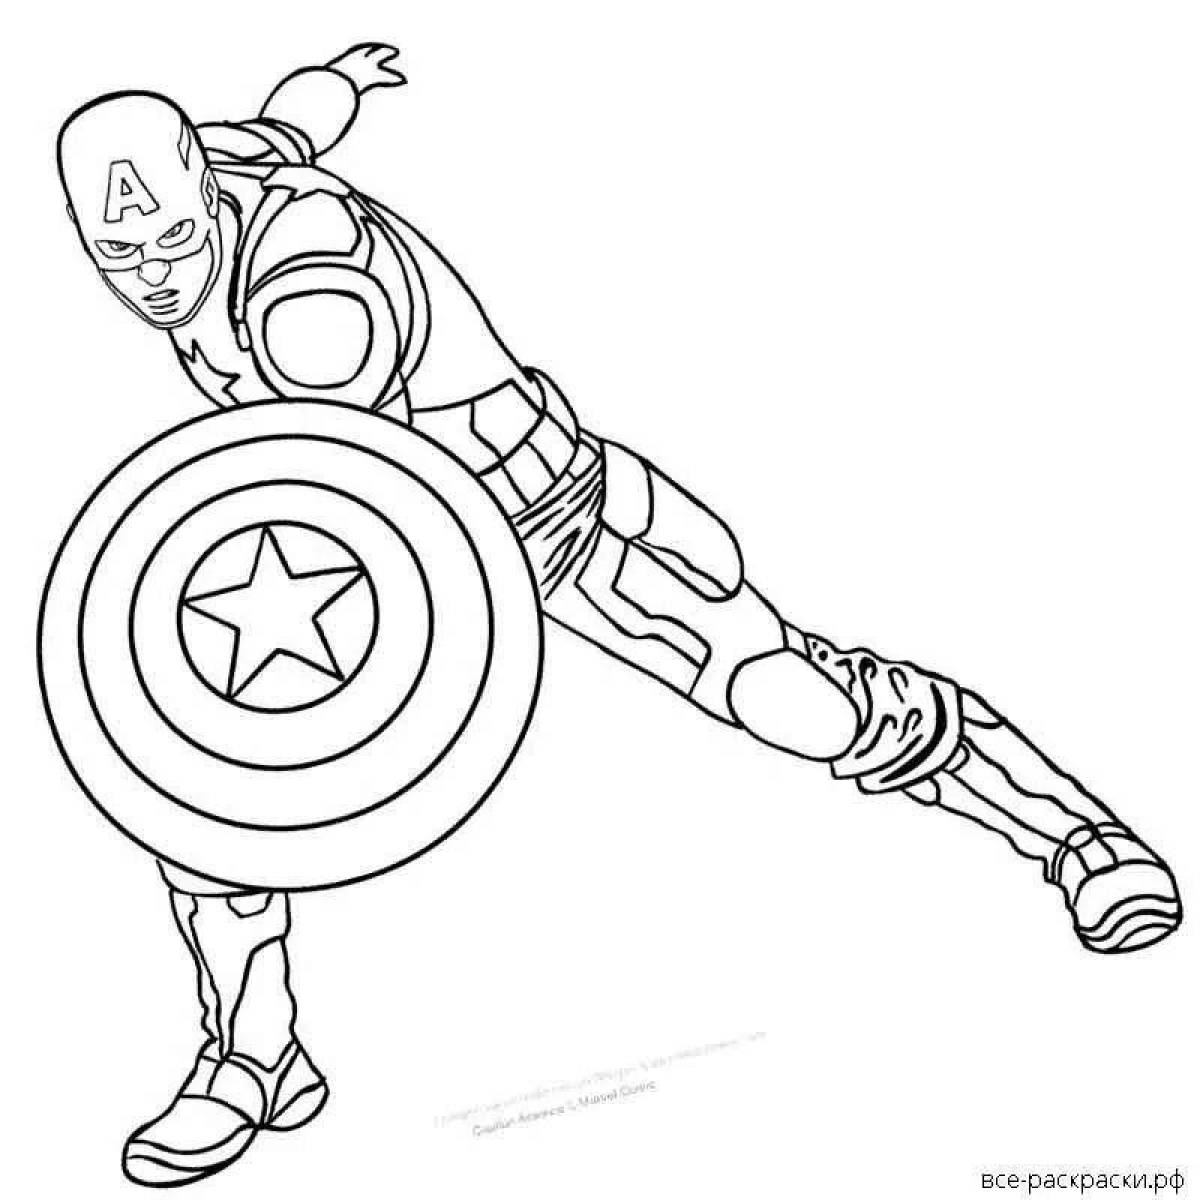 Colorful captain america's shield coloring page